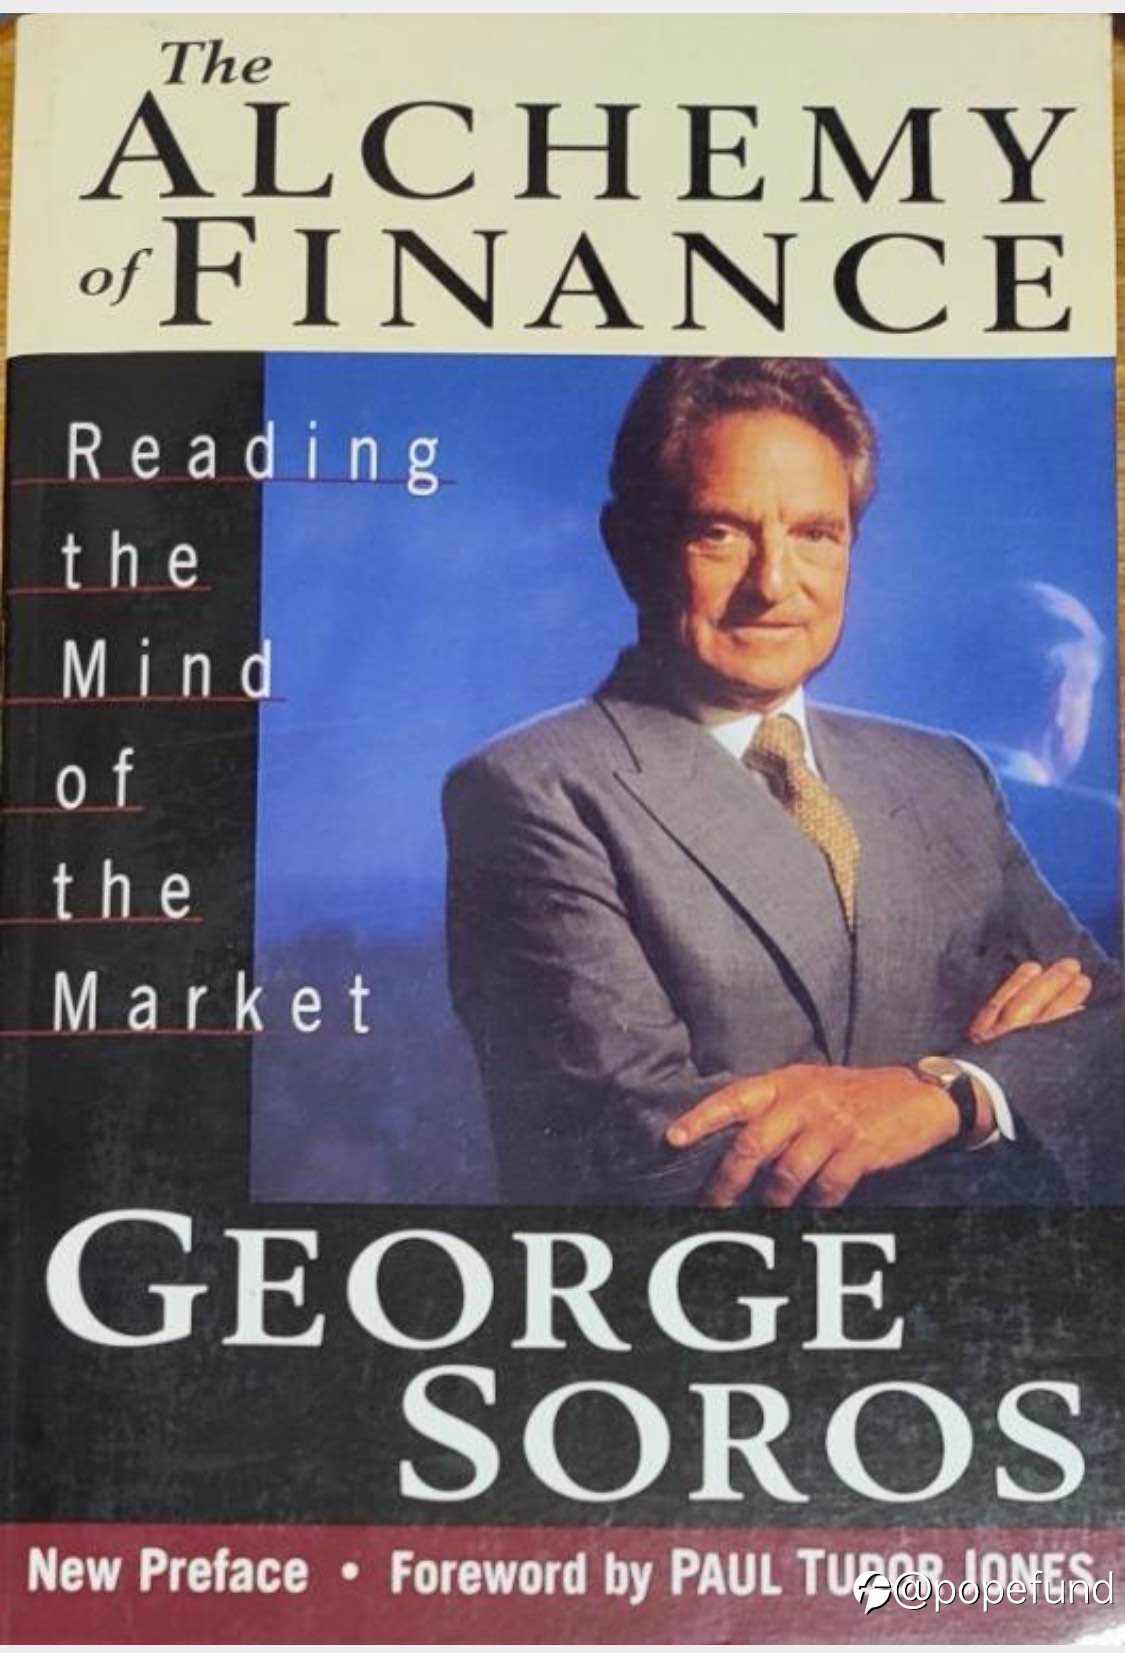 Weekly Review: George Soros, real traders are always building dreams & making them come true.